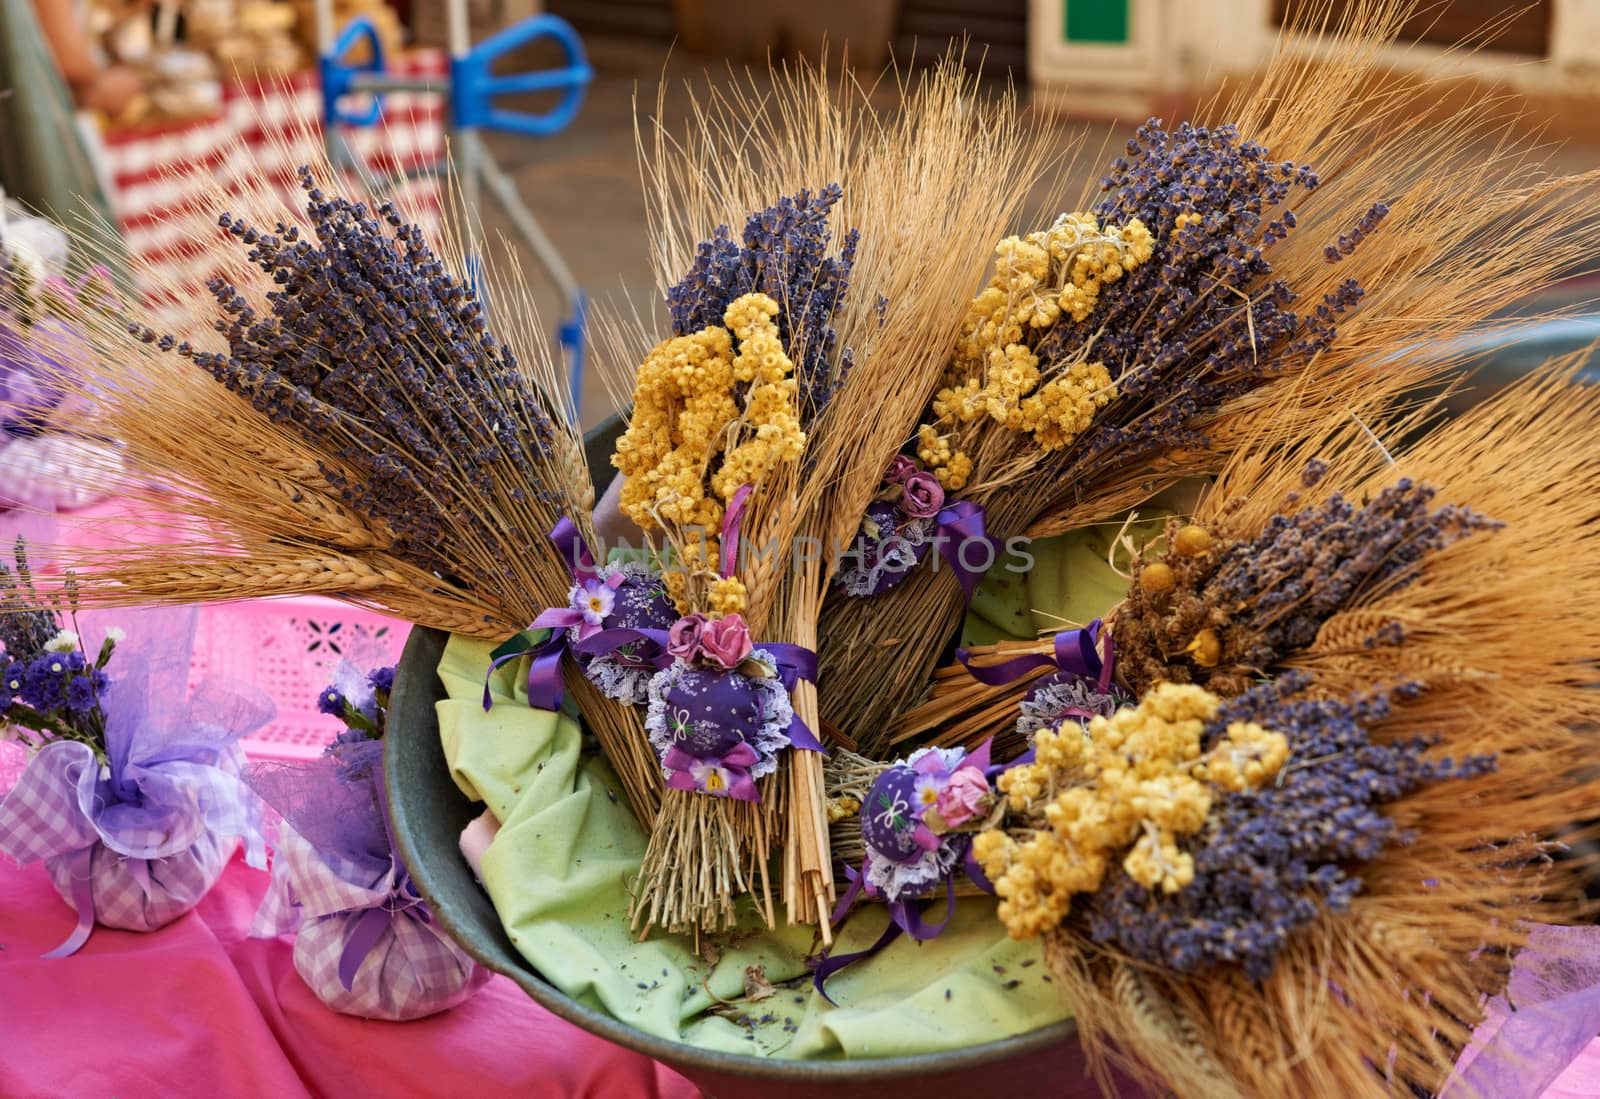 Lavender at Provence market by ecobo